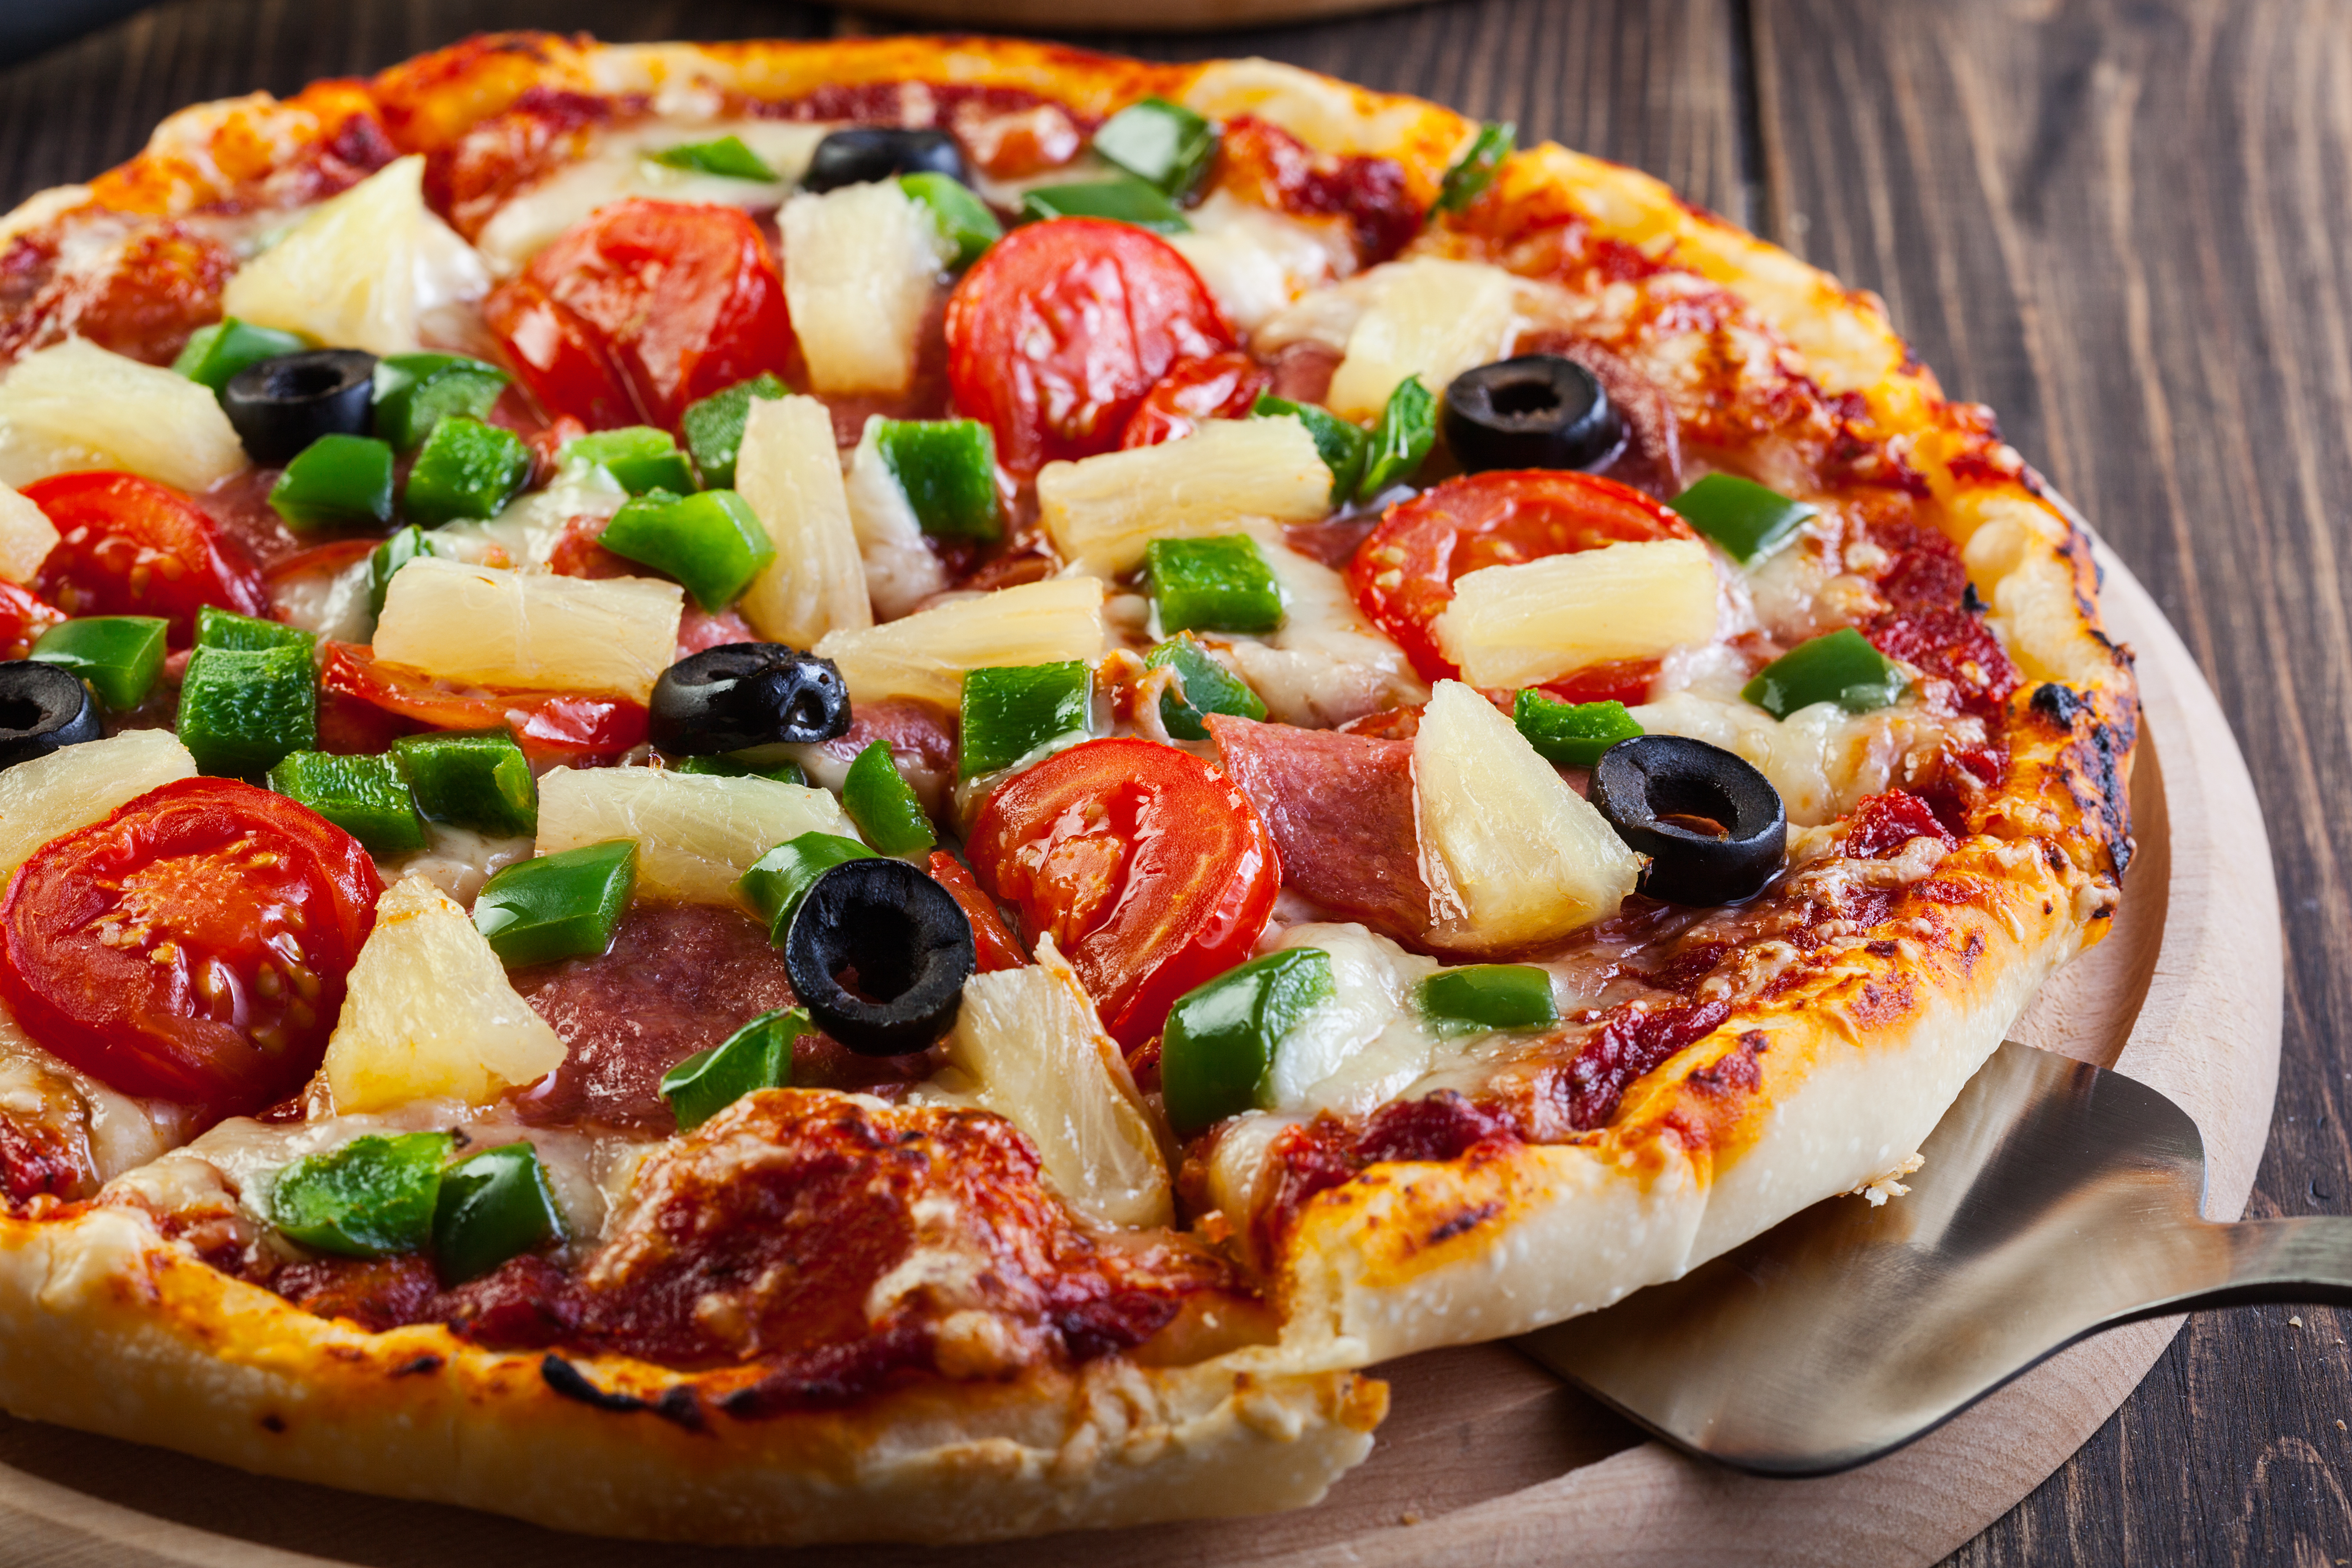 General 5600x3733 pizza pineapples tomatoes olives food pepperoni bell peppers cheese